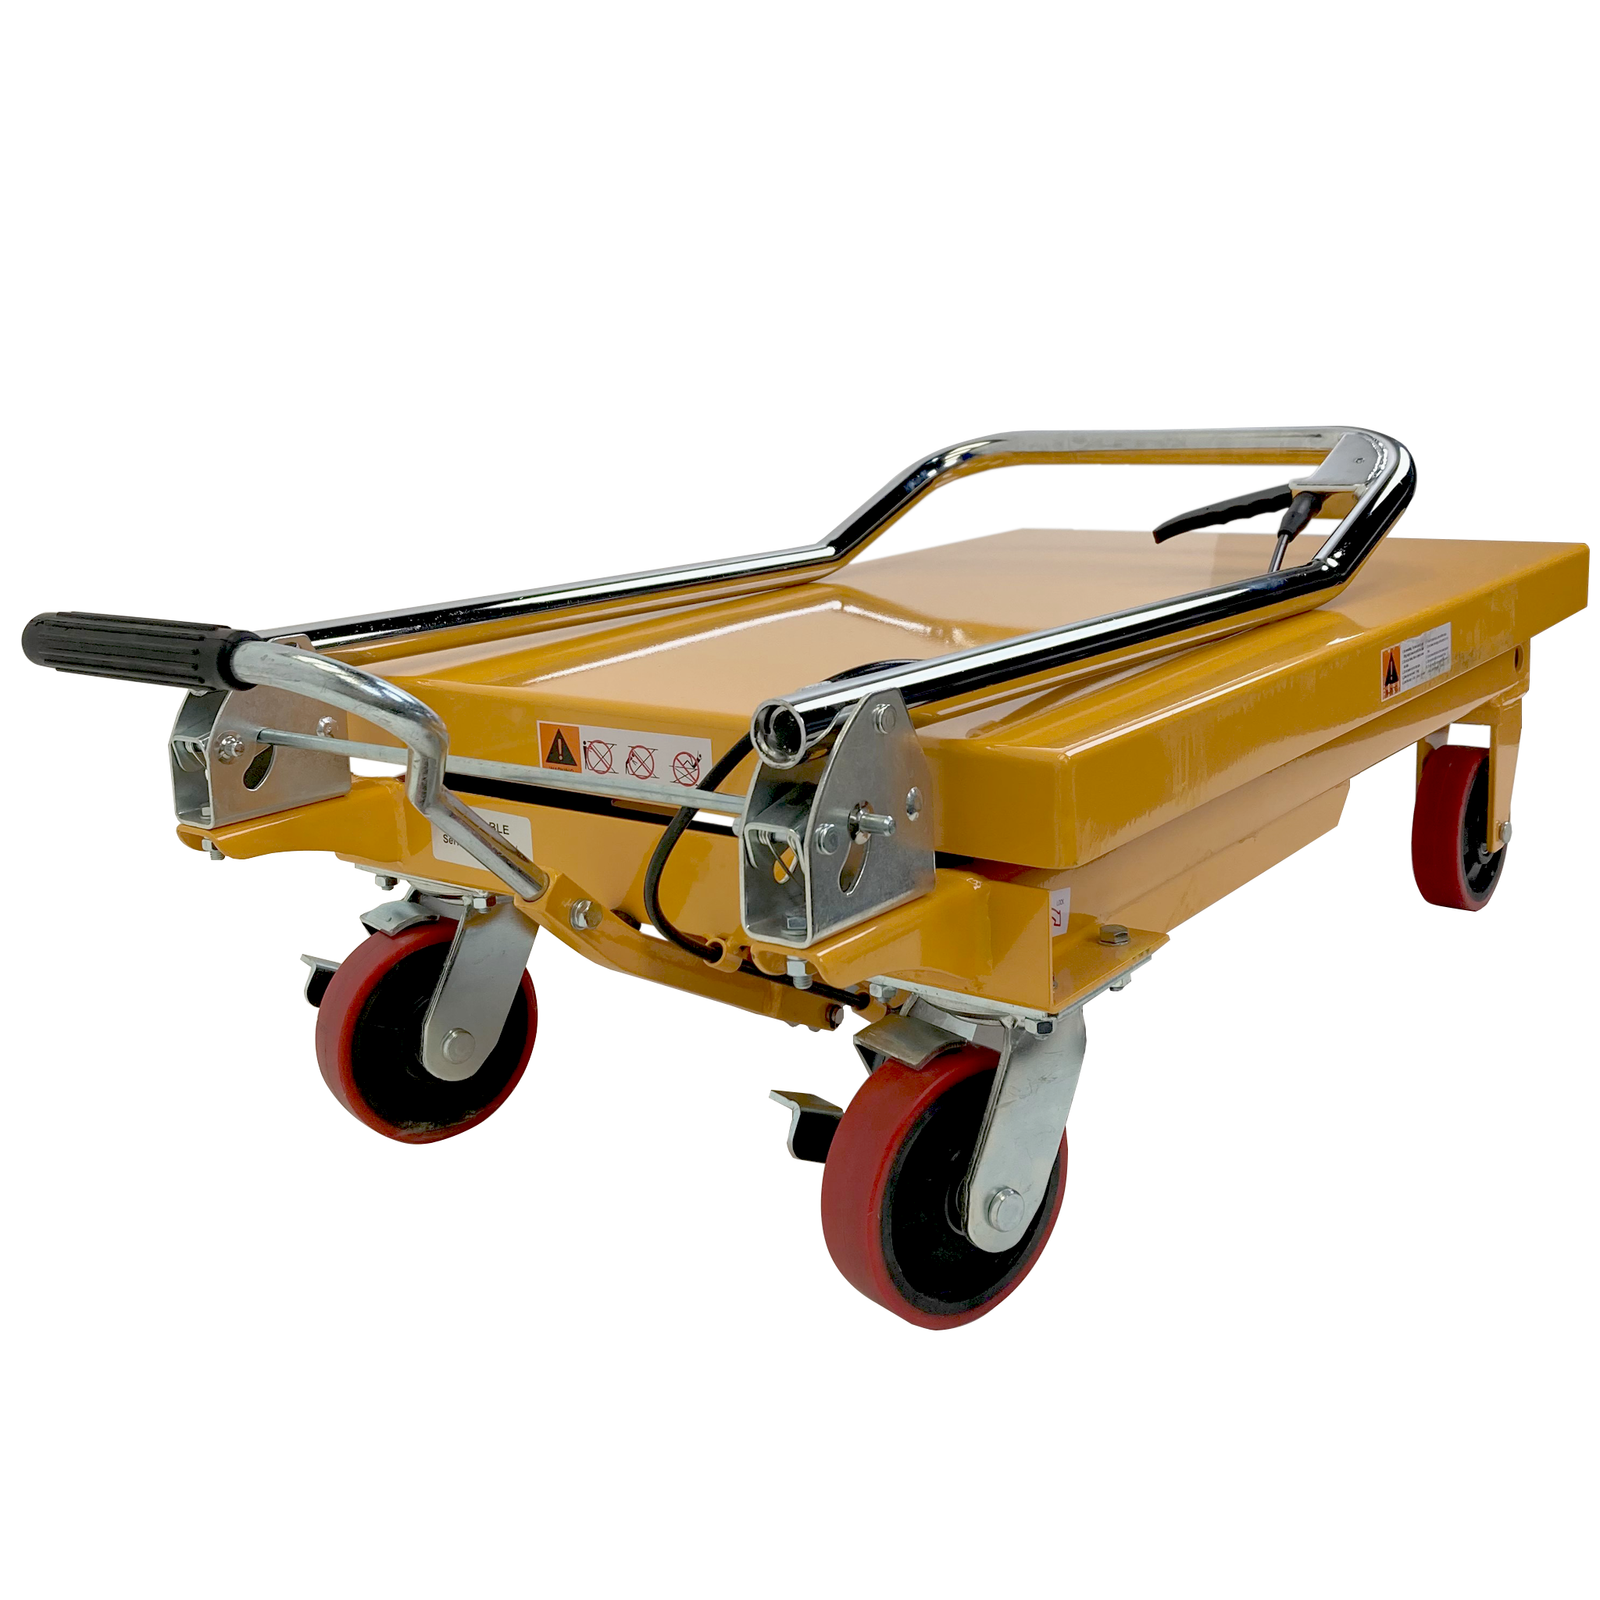 Table lift for 1100 kilograms with the handle collapsed to make it less bulky for ease of storage and transportation. Also shows all 4 red rubber heavy duty wheels . Wheels on back have brakes, wheels in front do not have brakes